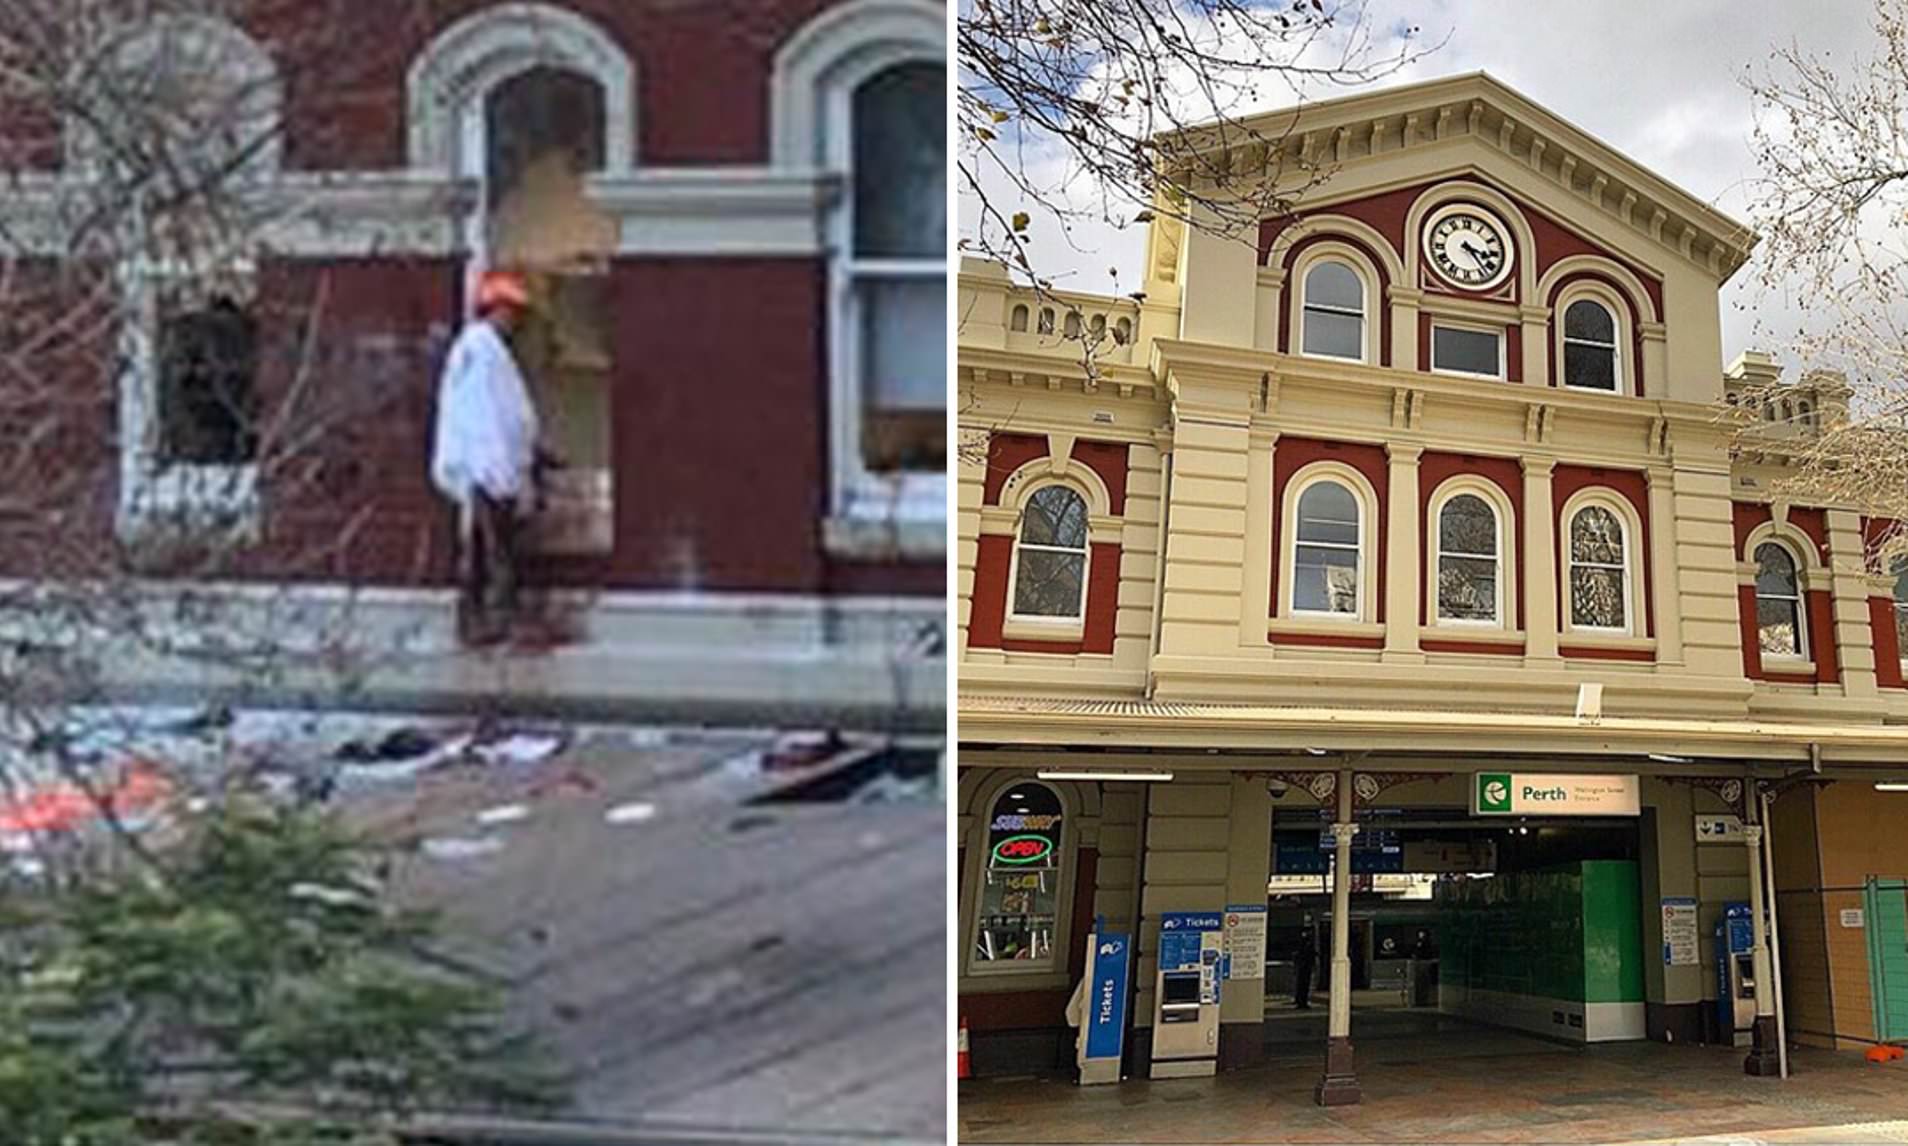 Naked man on train station roof puts Perth street in lockdown